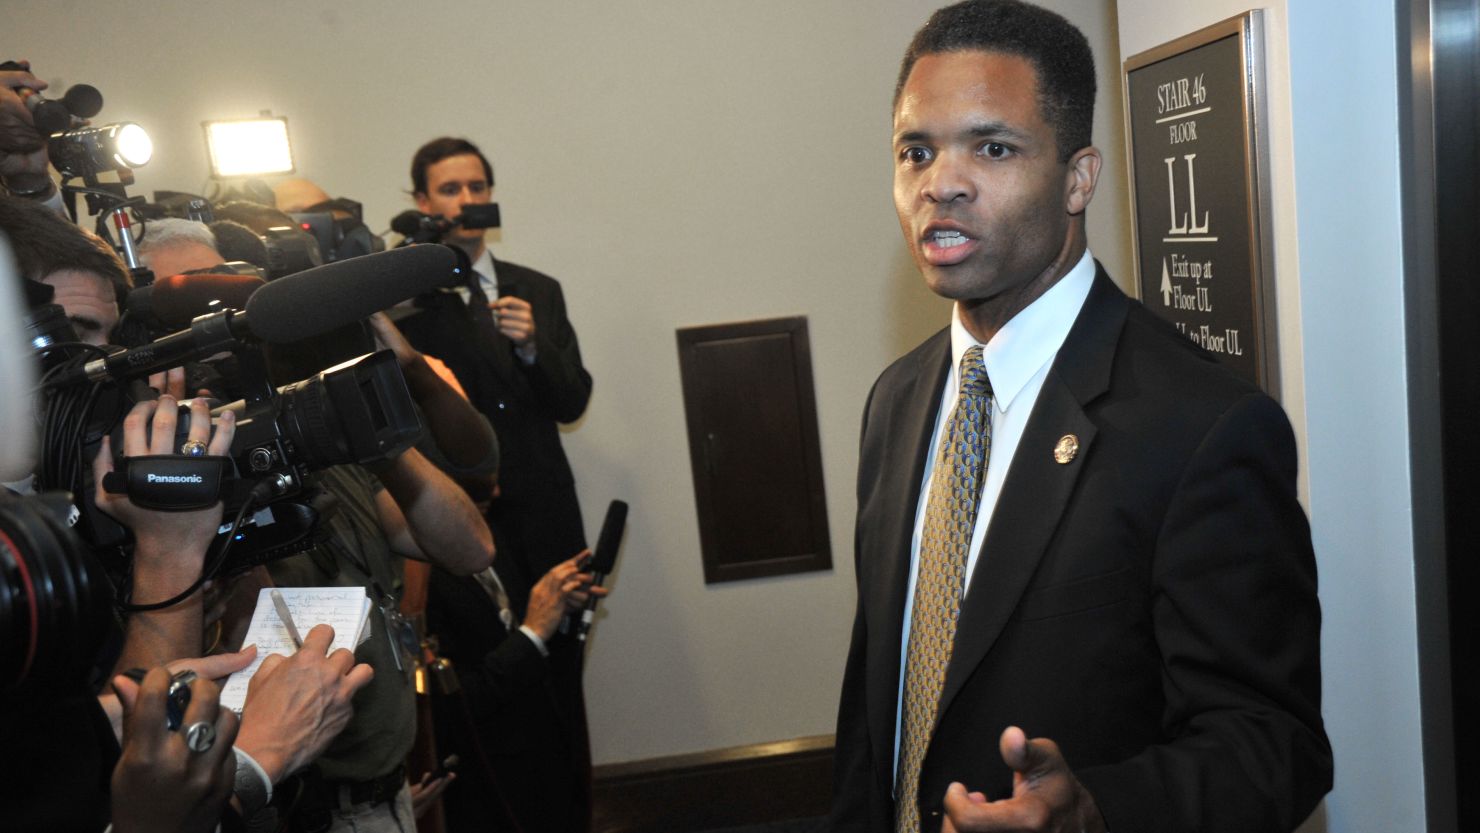 Officials say it will be up to a judge to determine whether Jesse Jackson Jr. will serve any prison time.